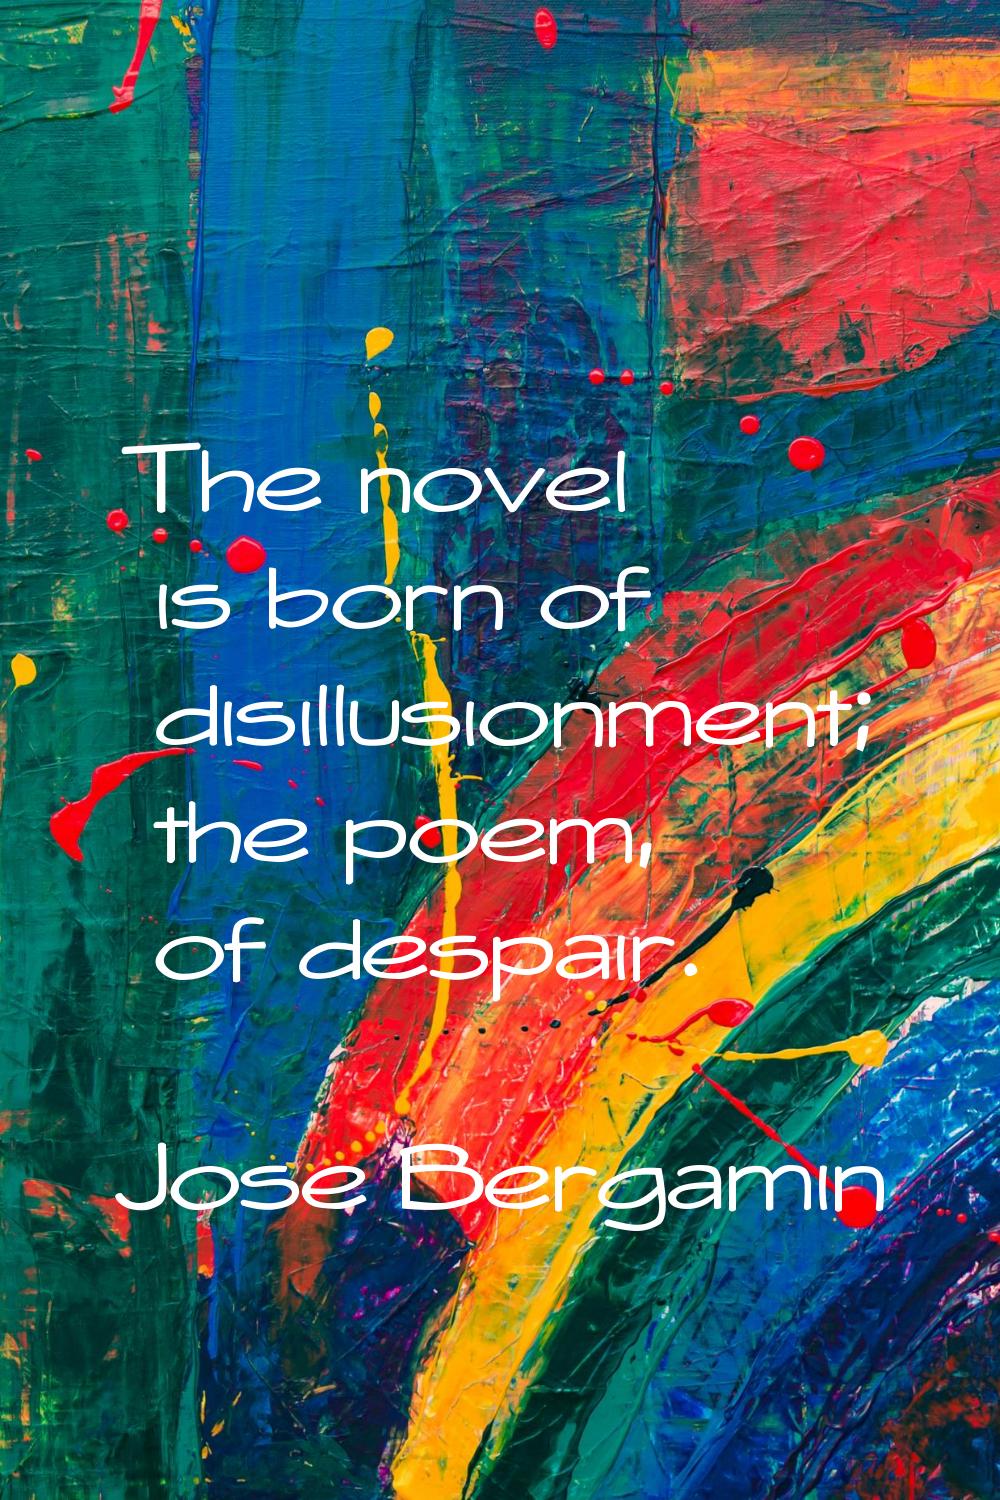 The novel is born of disillusionment; the poem, of despair.